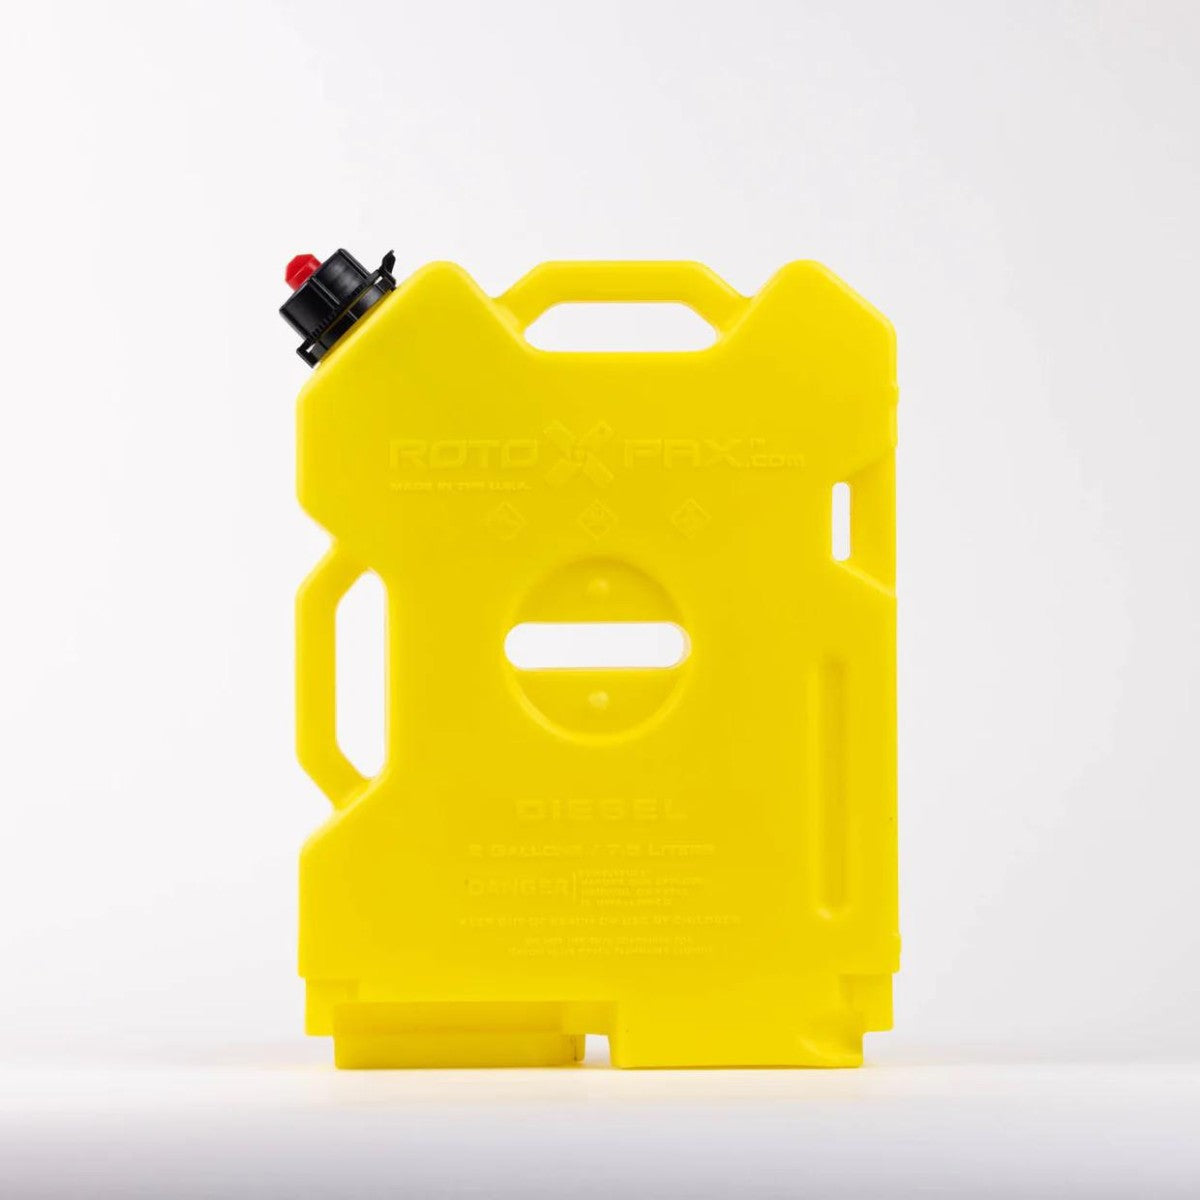 RotoPax RX-2D 2 Gallon Diesel Container - Yellow